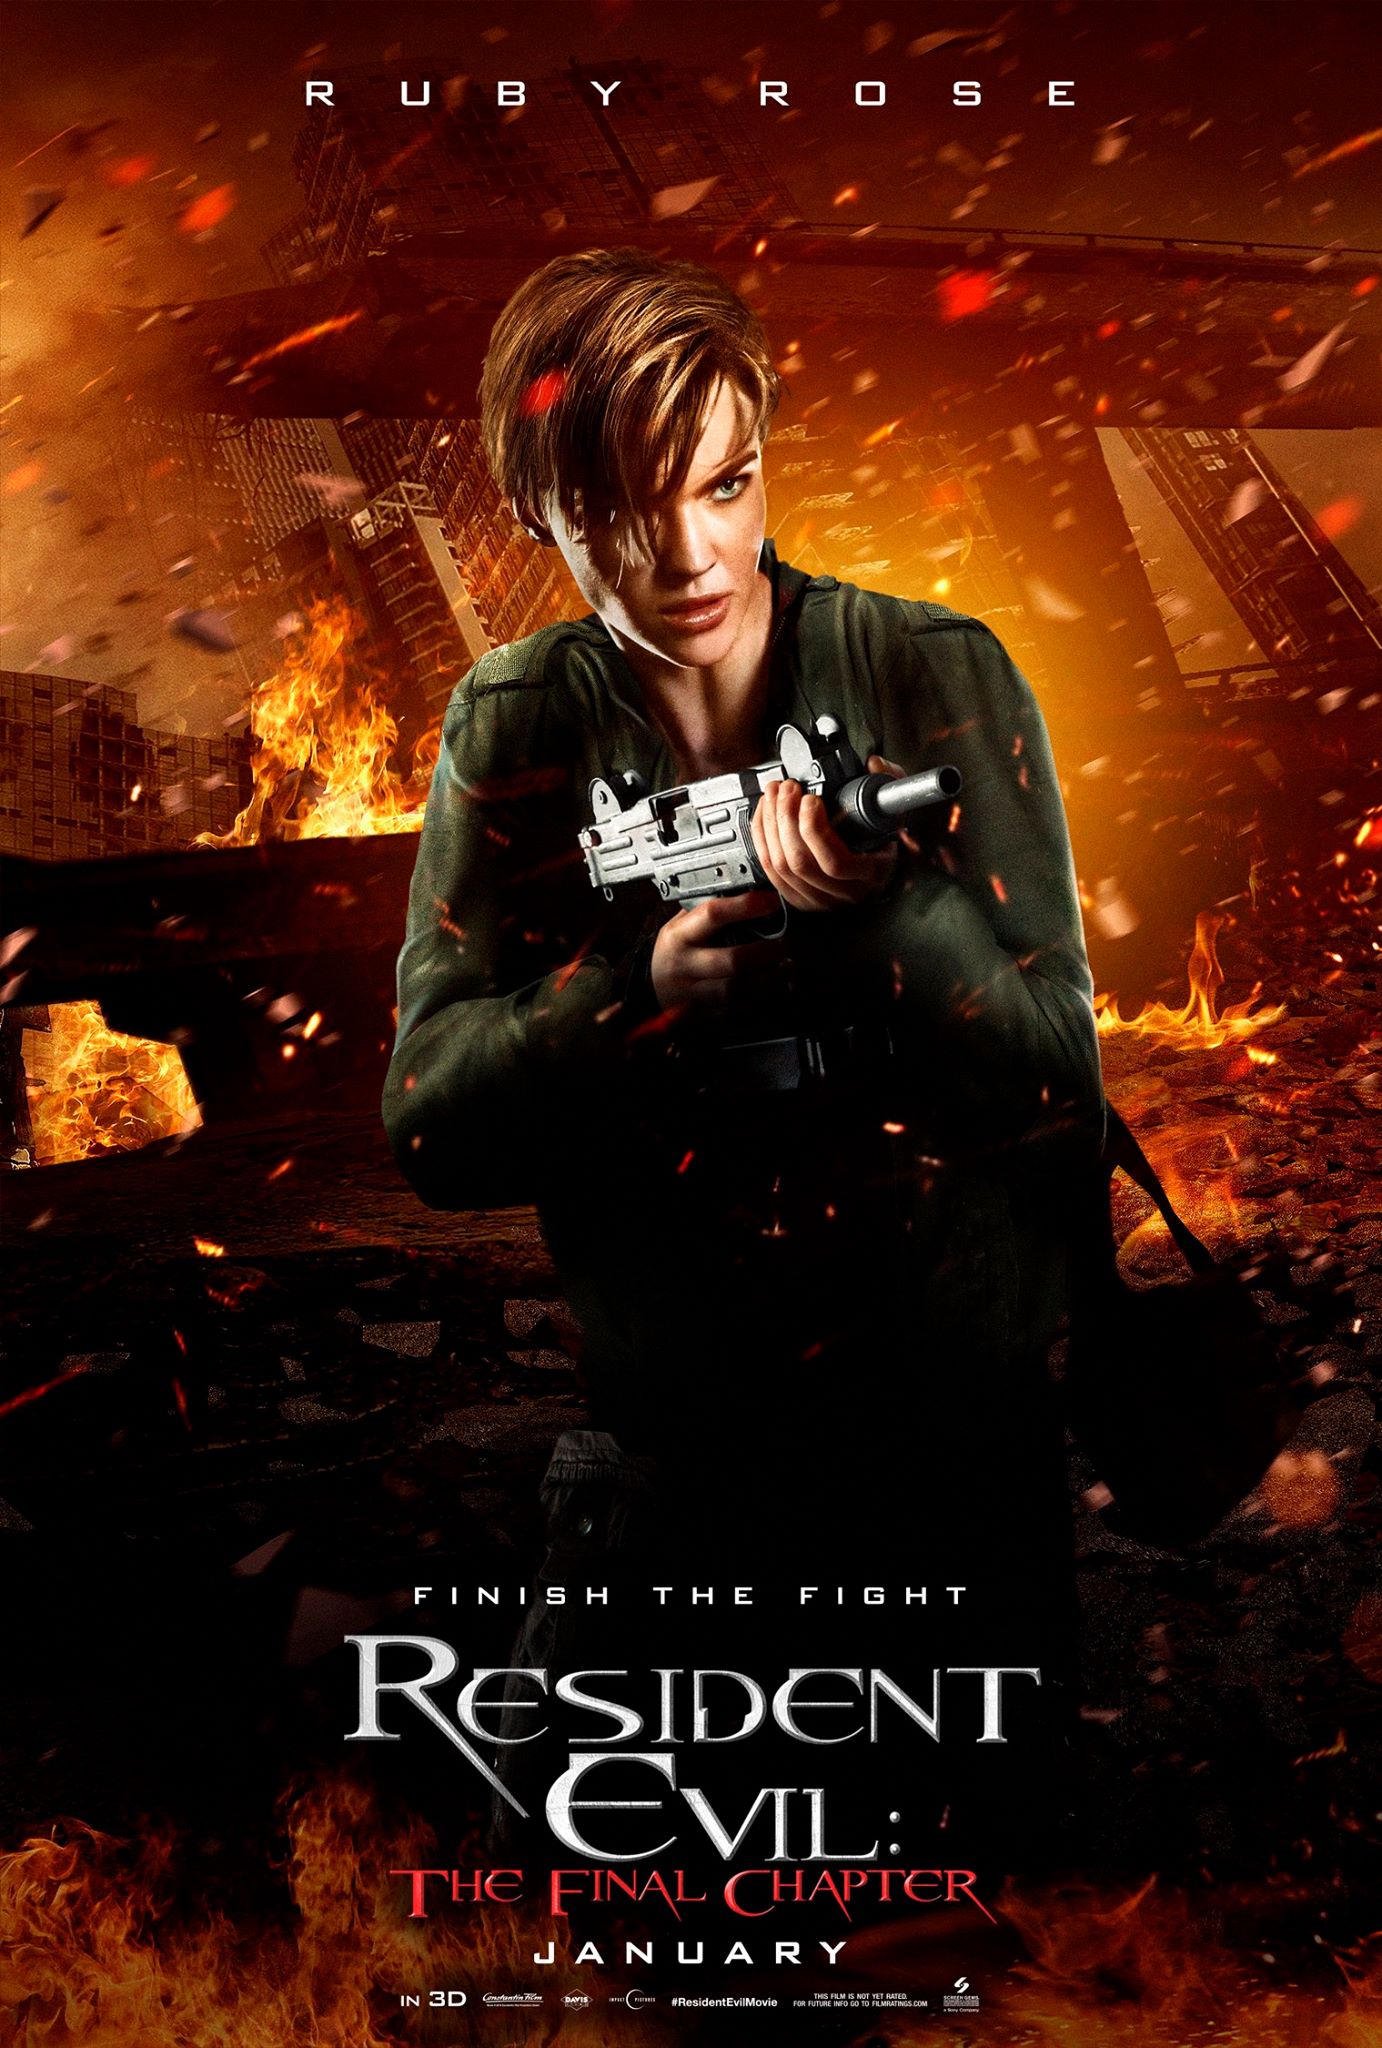 Resident Evil: The Final Chapter #7